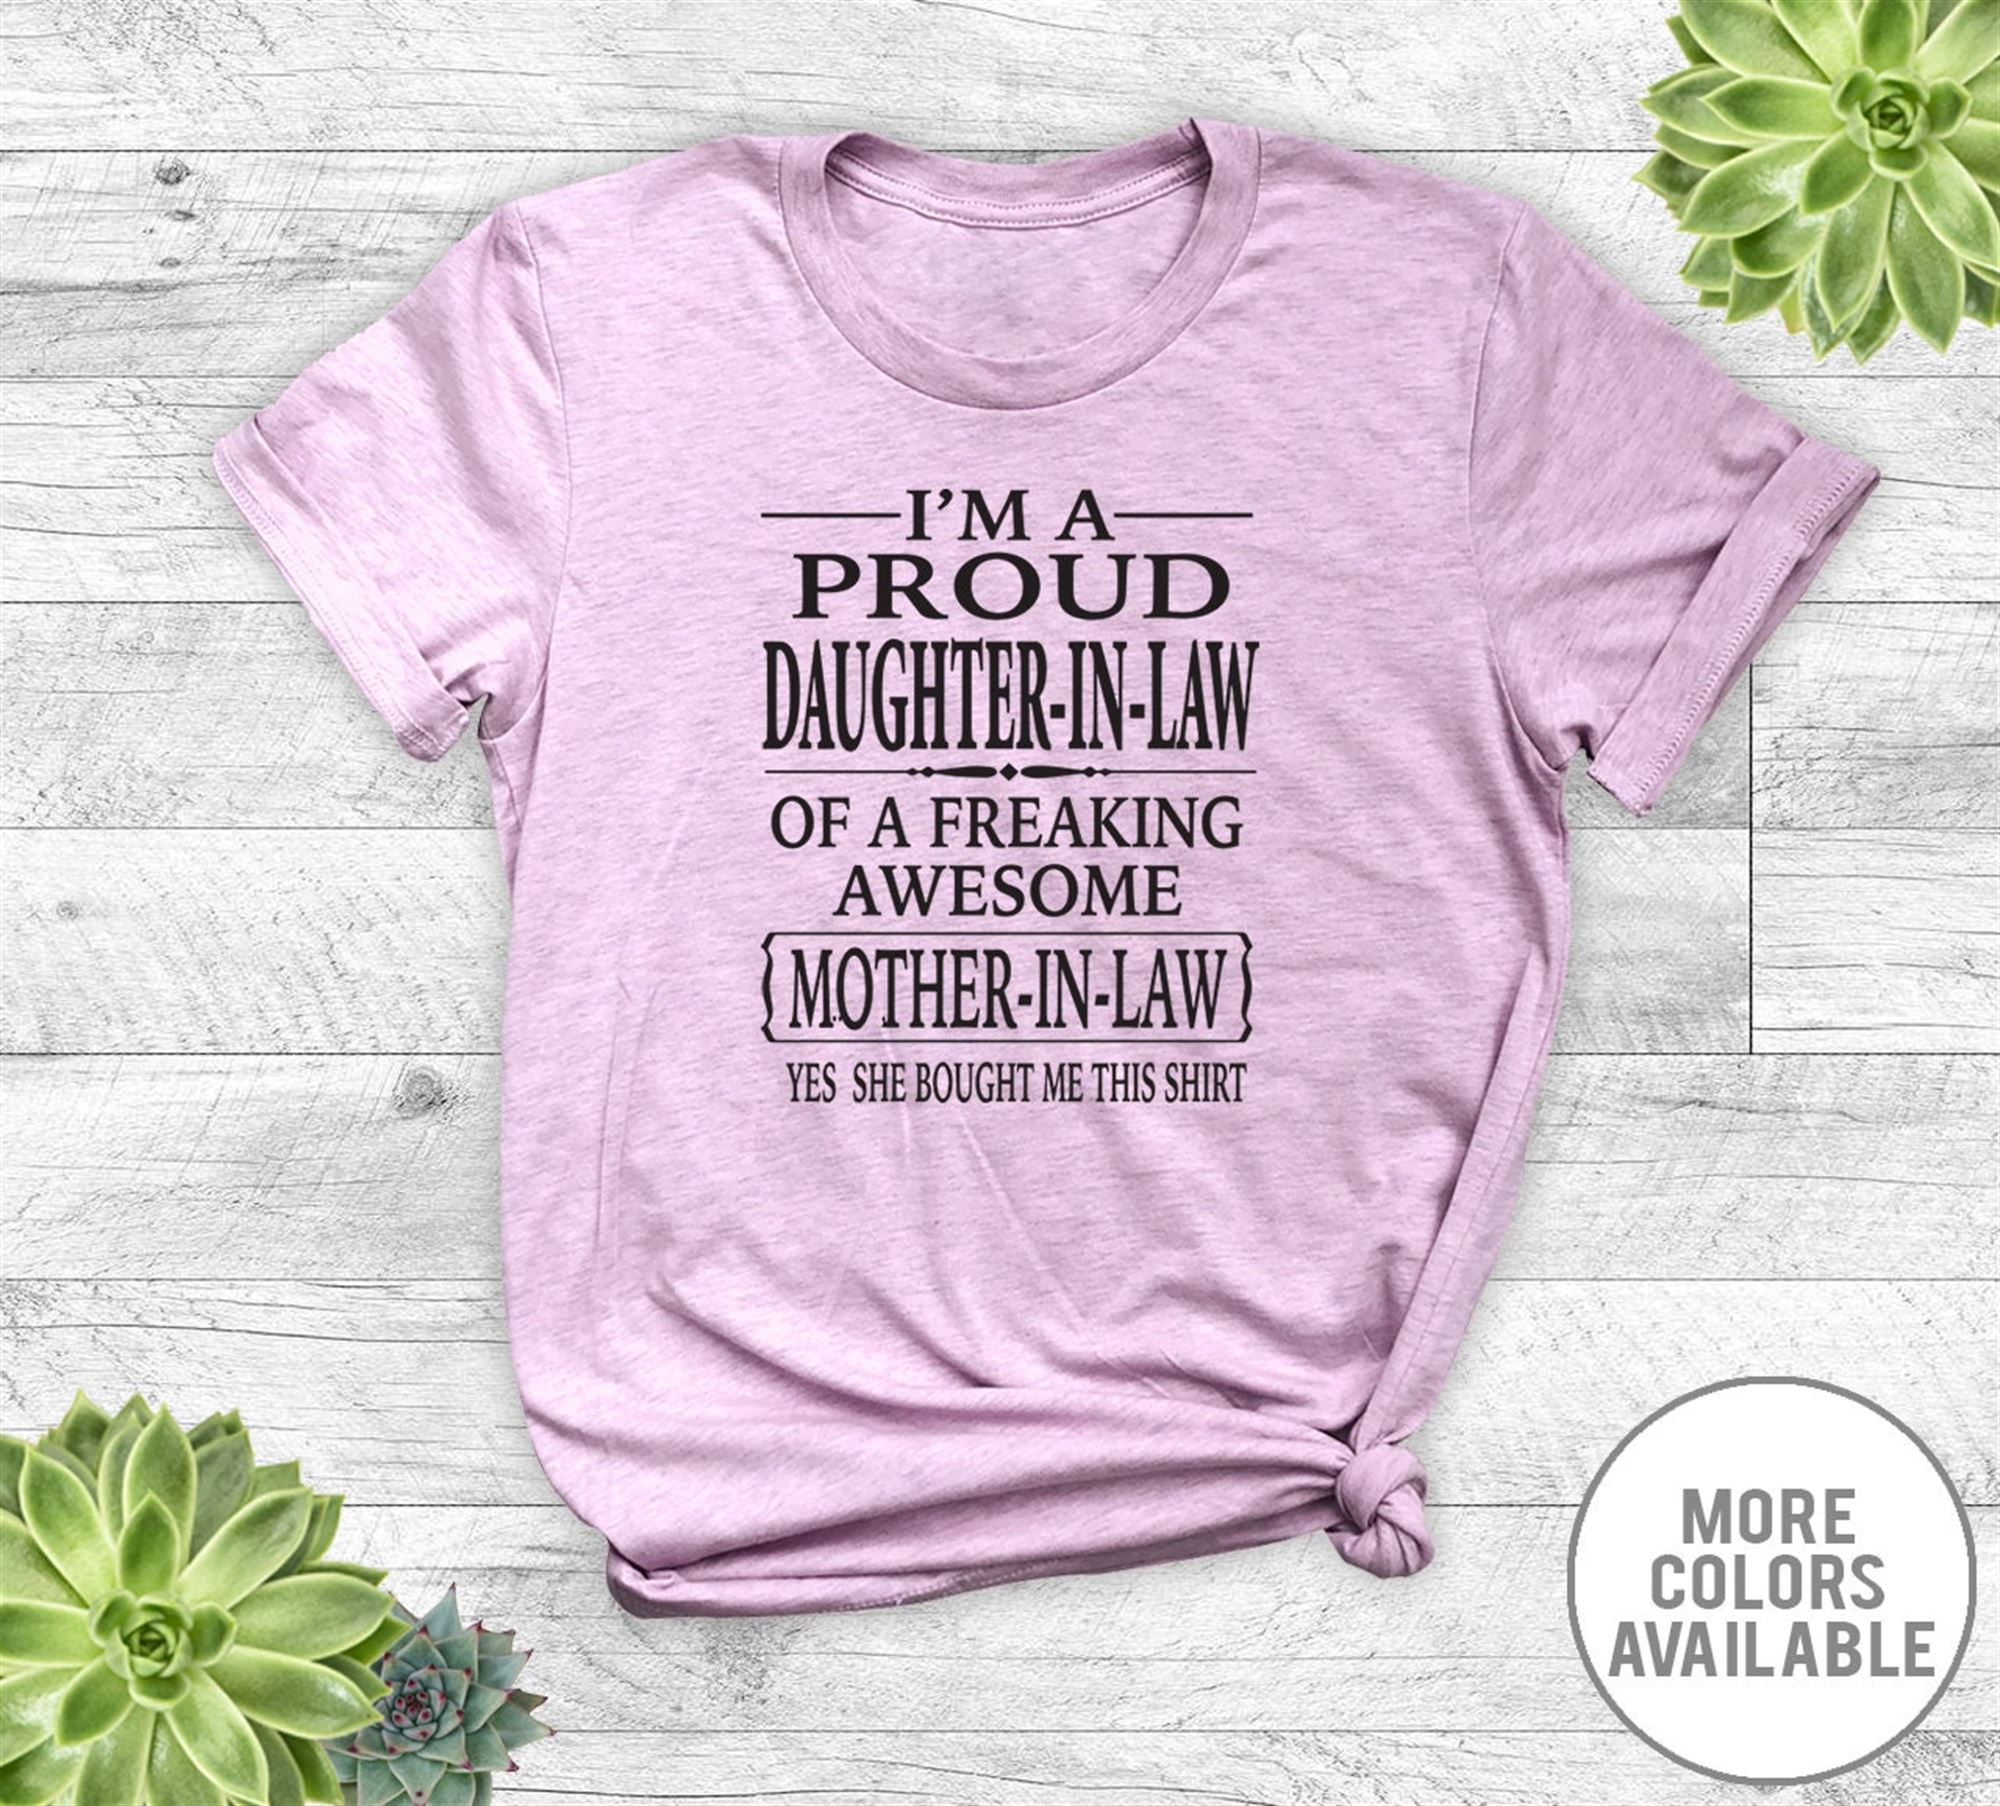 Gifts I'm A Proud Daughter-in-law Of A Freaking Awesome Mother-in-law - Unisex T-shirt - Daughter-in-law Shirt - Daughter-in-law Gift 